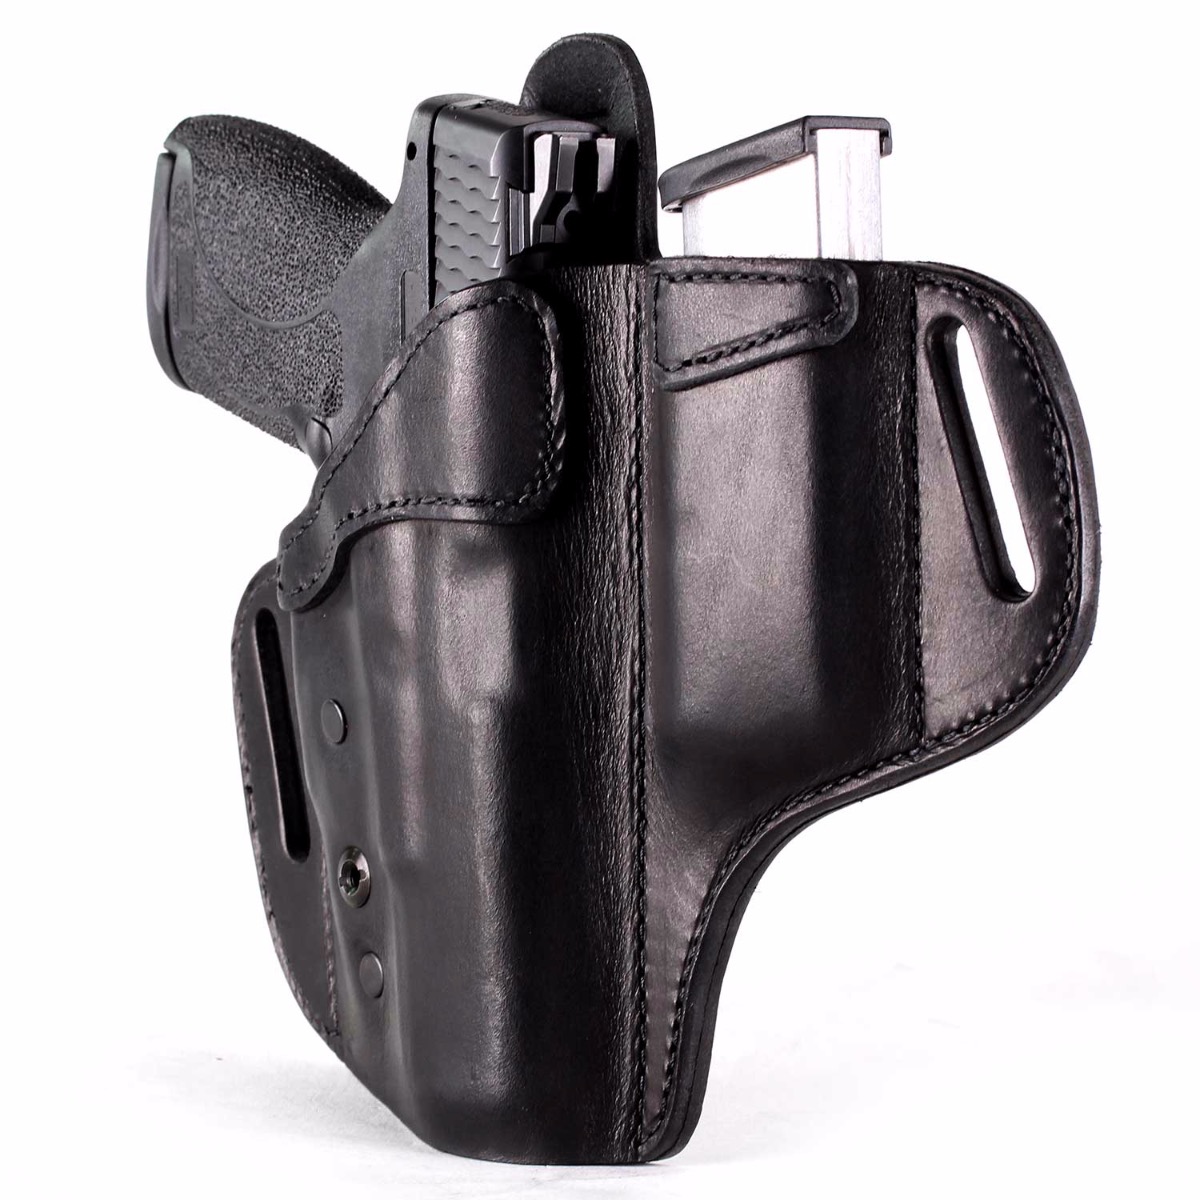 Tactical OWB Right Hand Gun Holster Belt Holster and Magazine Pouch Choose Model 